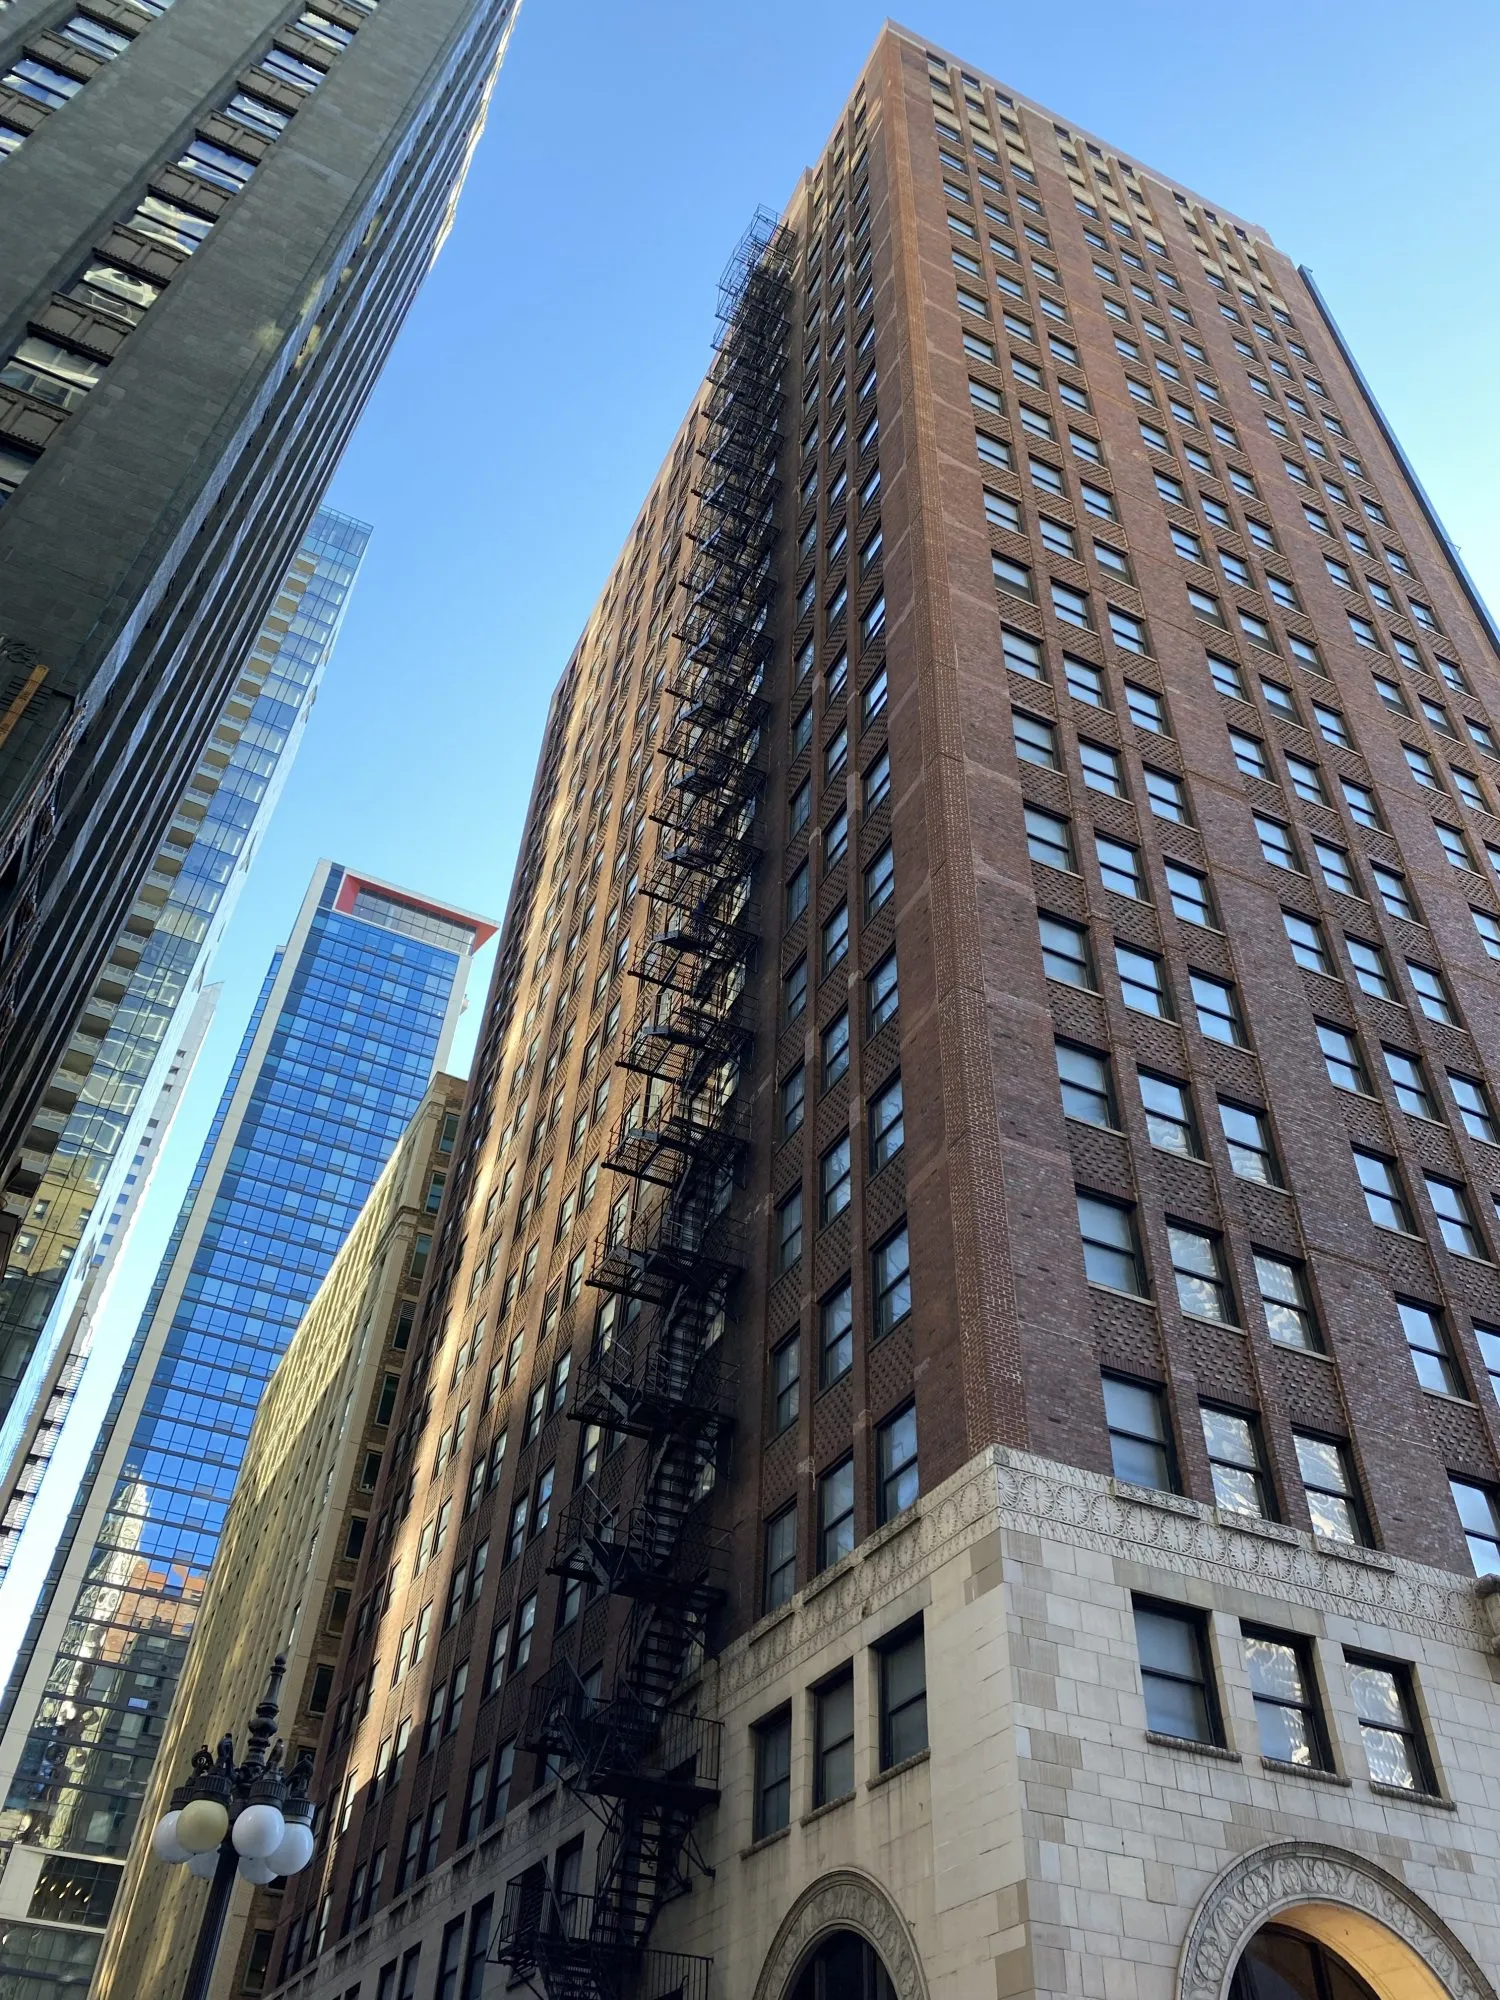 shot of tall, brick buildings from the street view pointed up. blue sky. Chicago